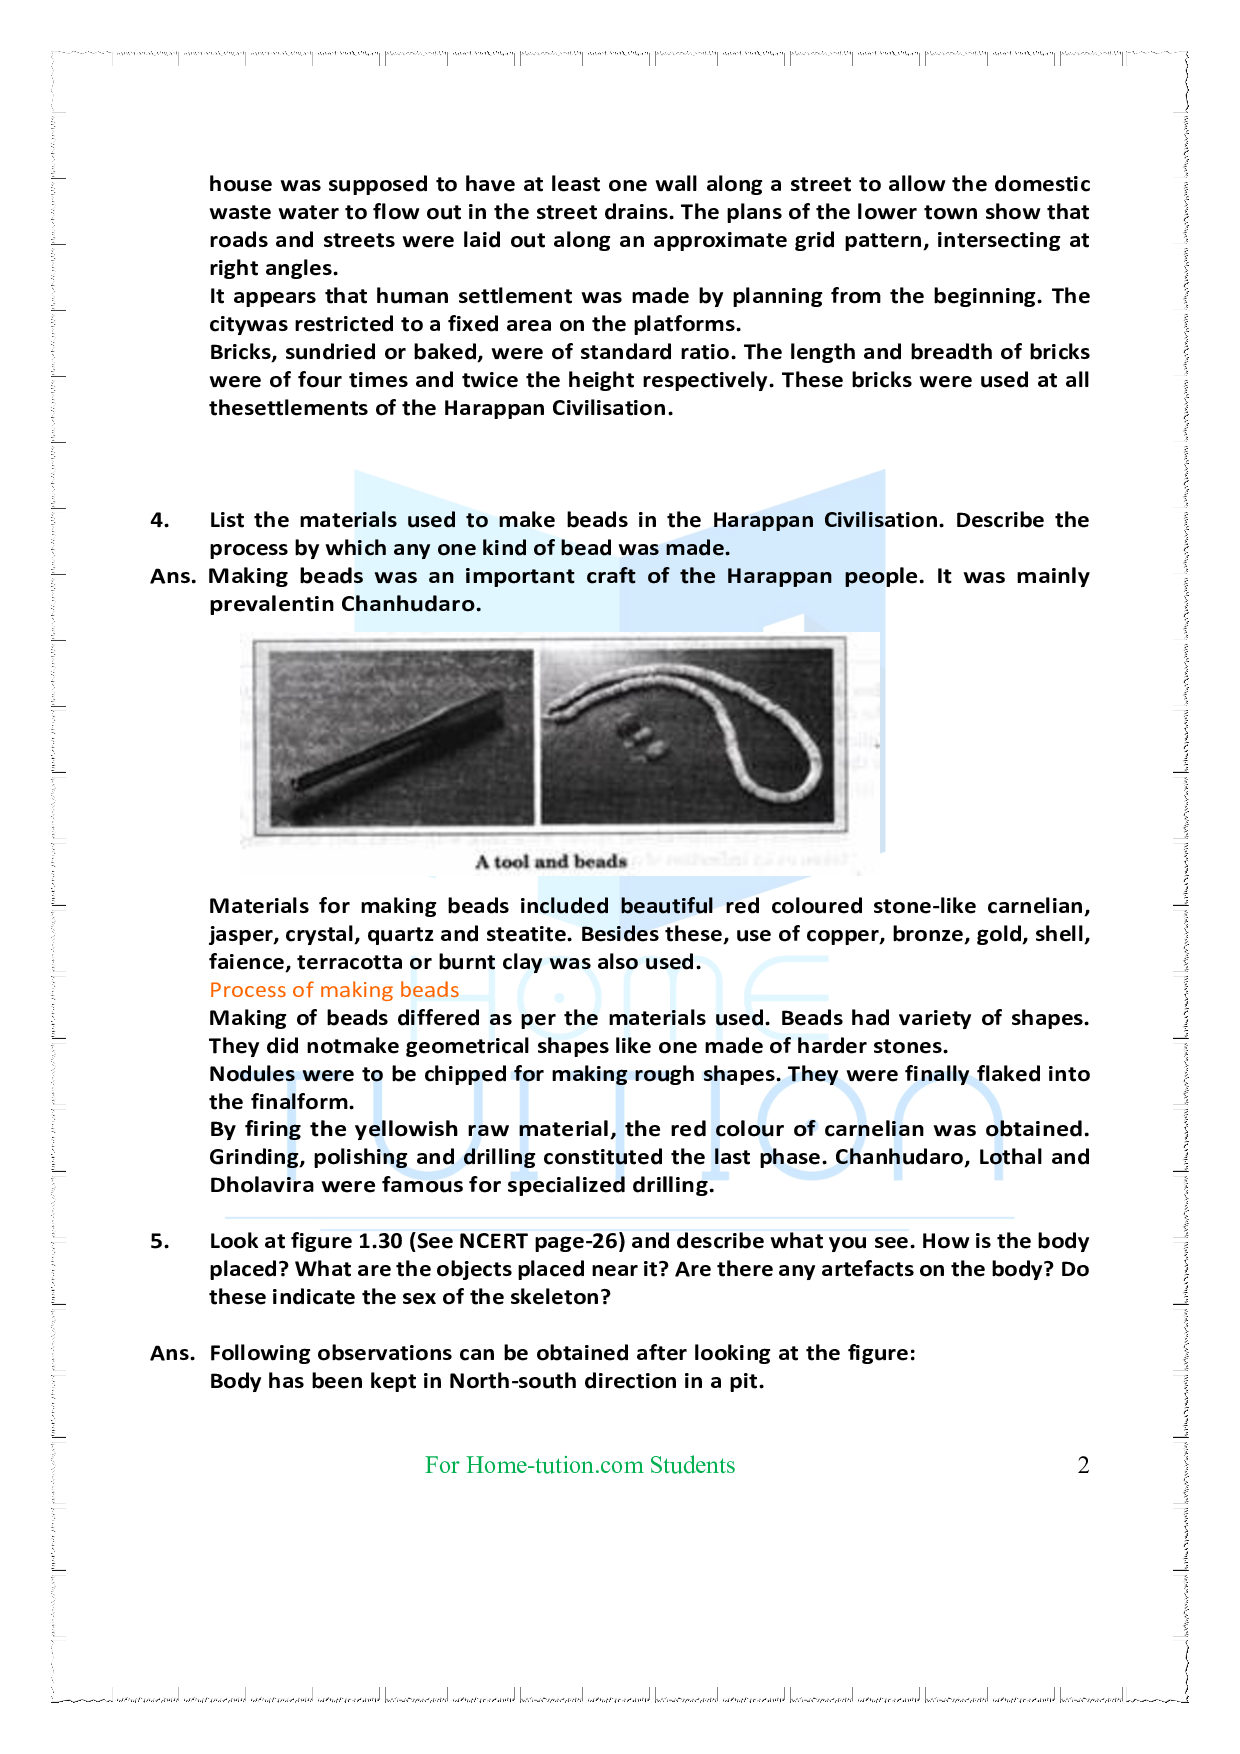 NCERT Solutions Chapter 1 Bricks, Beads and Bones the Harappan civilisation